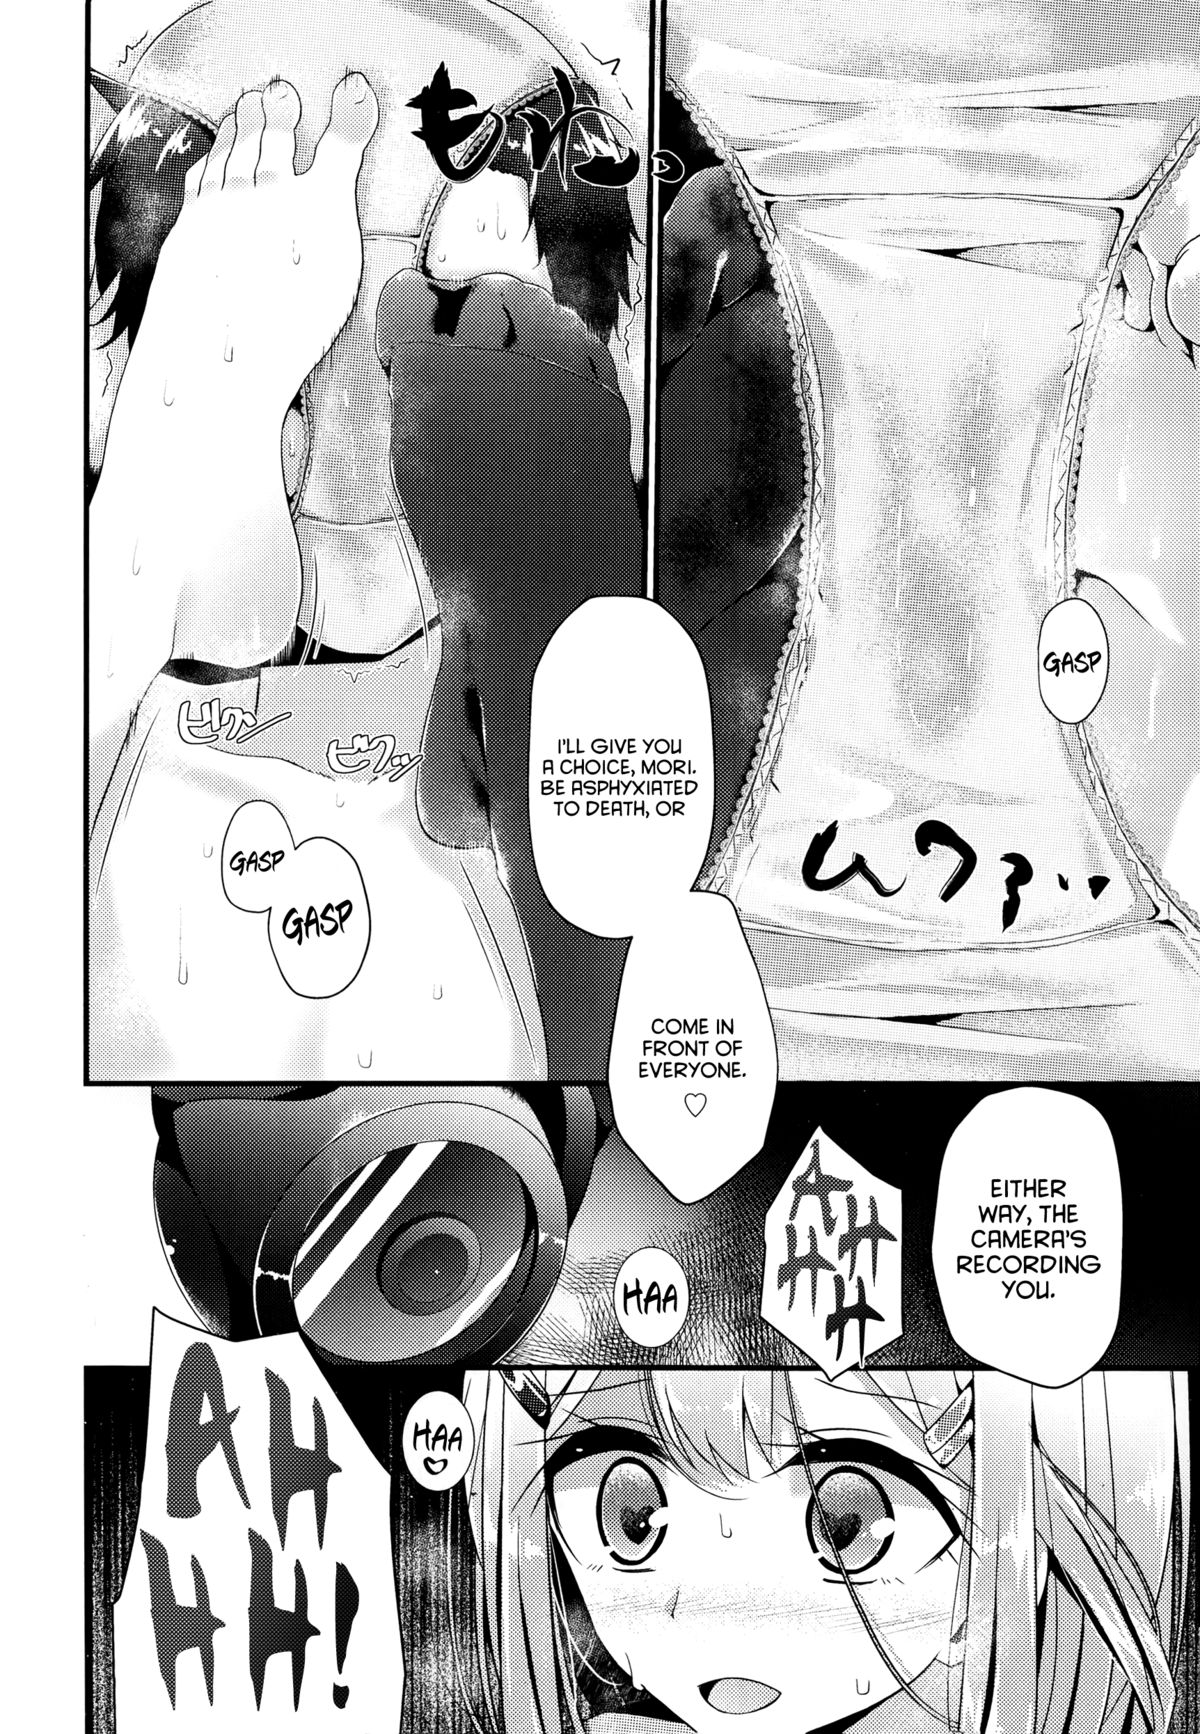 [Oouso] Olfactophilia (Girls forM Vol. 06) [English] =LWB= page 22 full